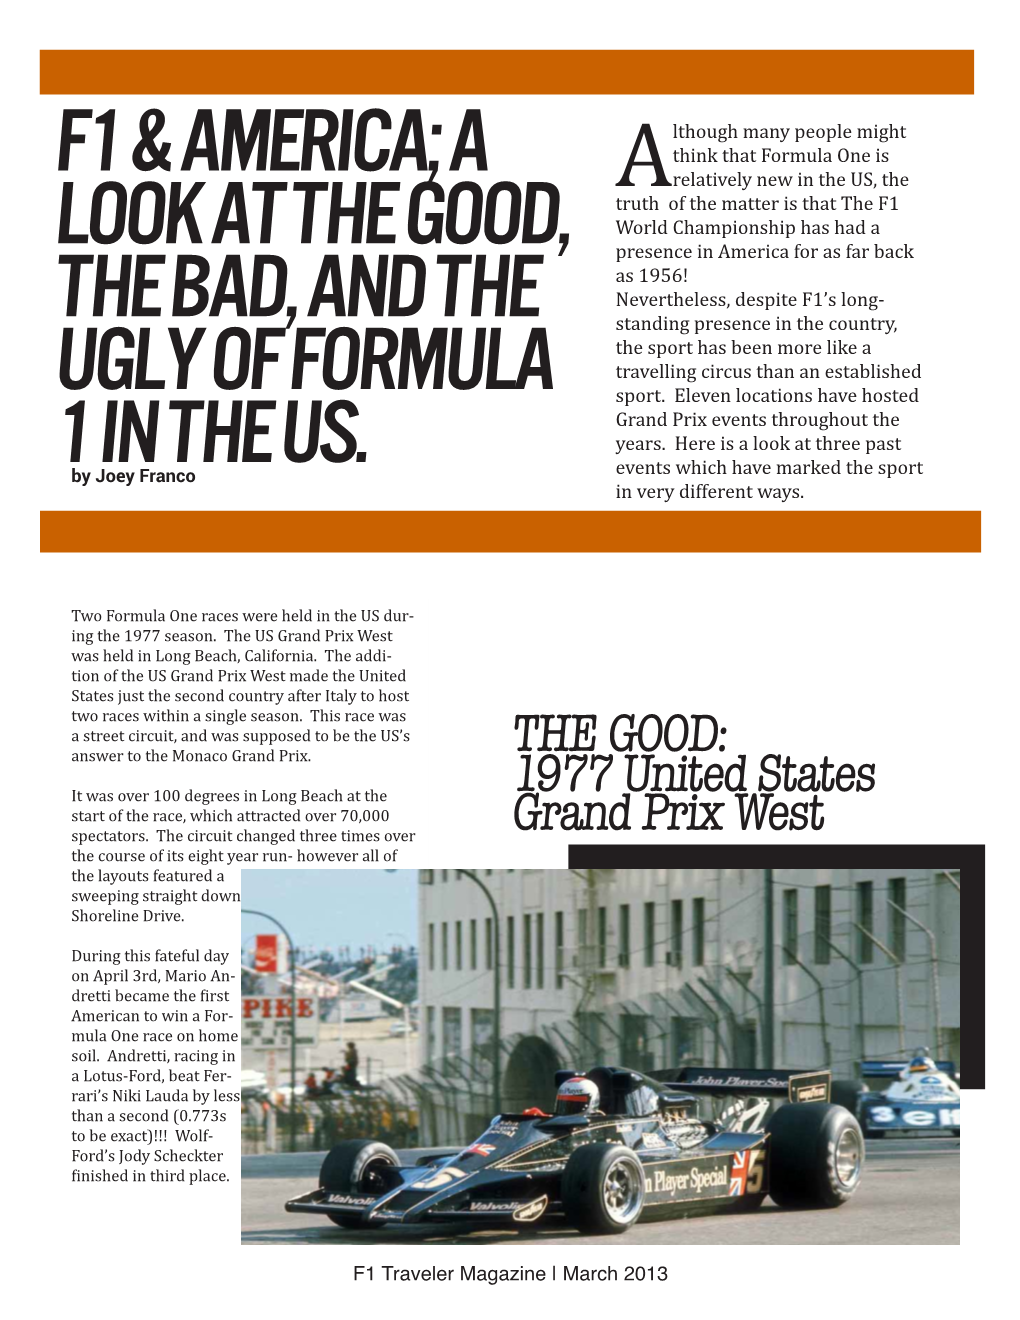 F1 & America; a Look at the Good, the Bad, and the Ugly of Formula 1 In